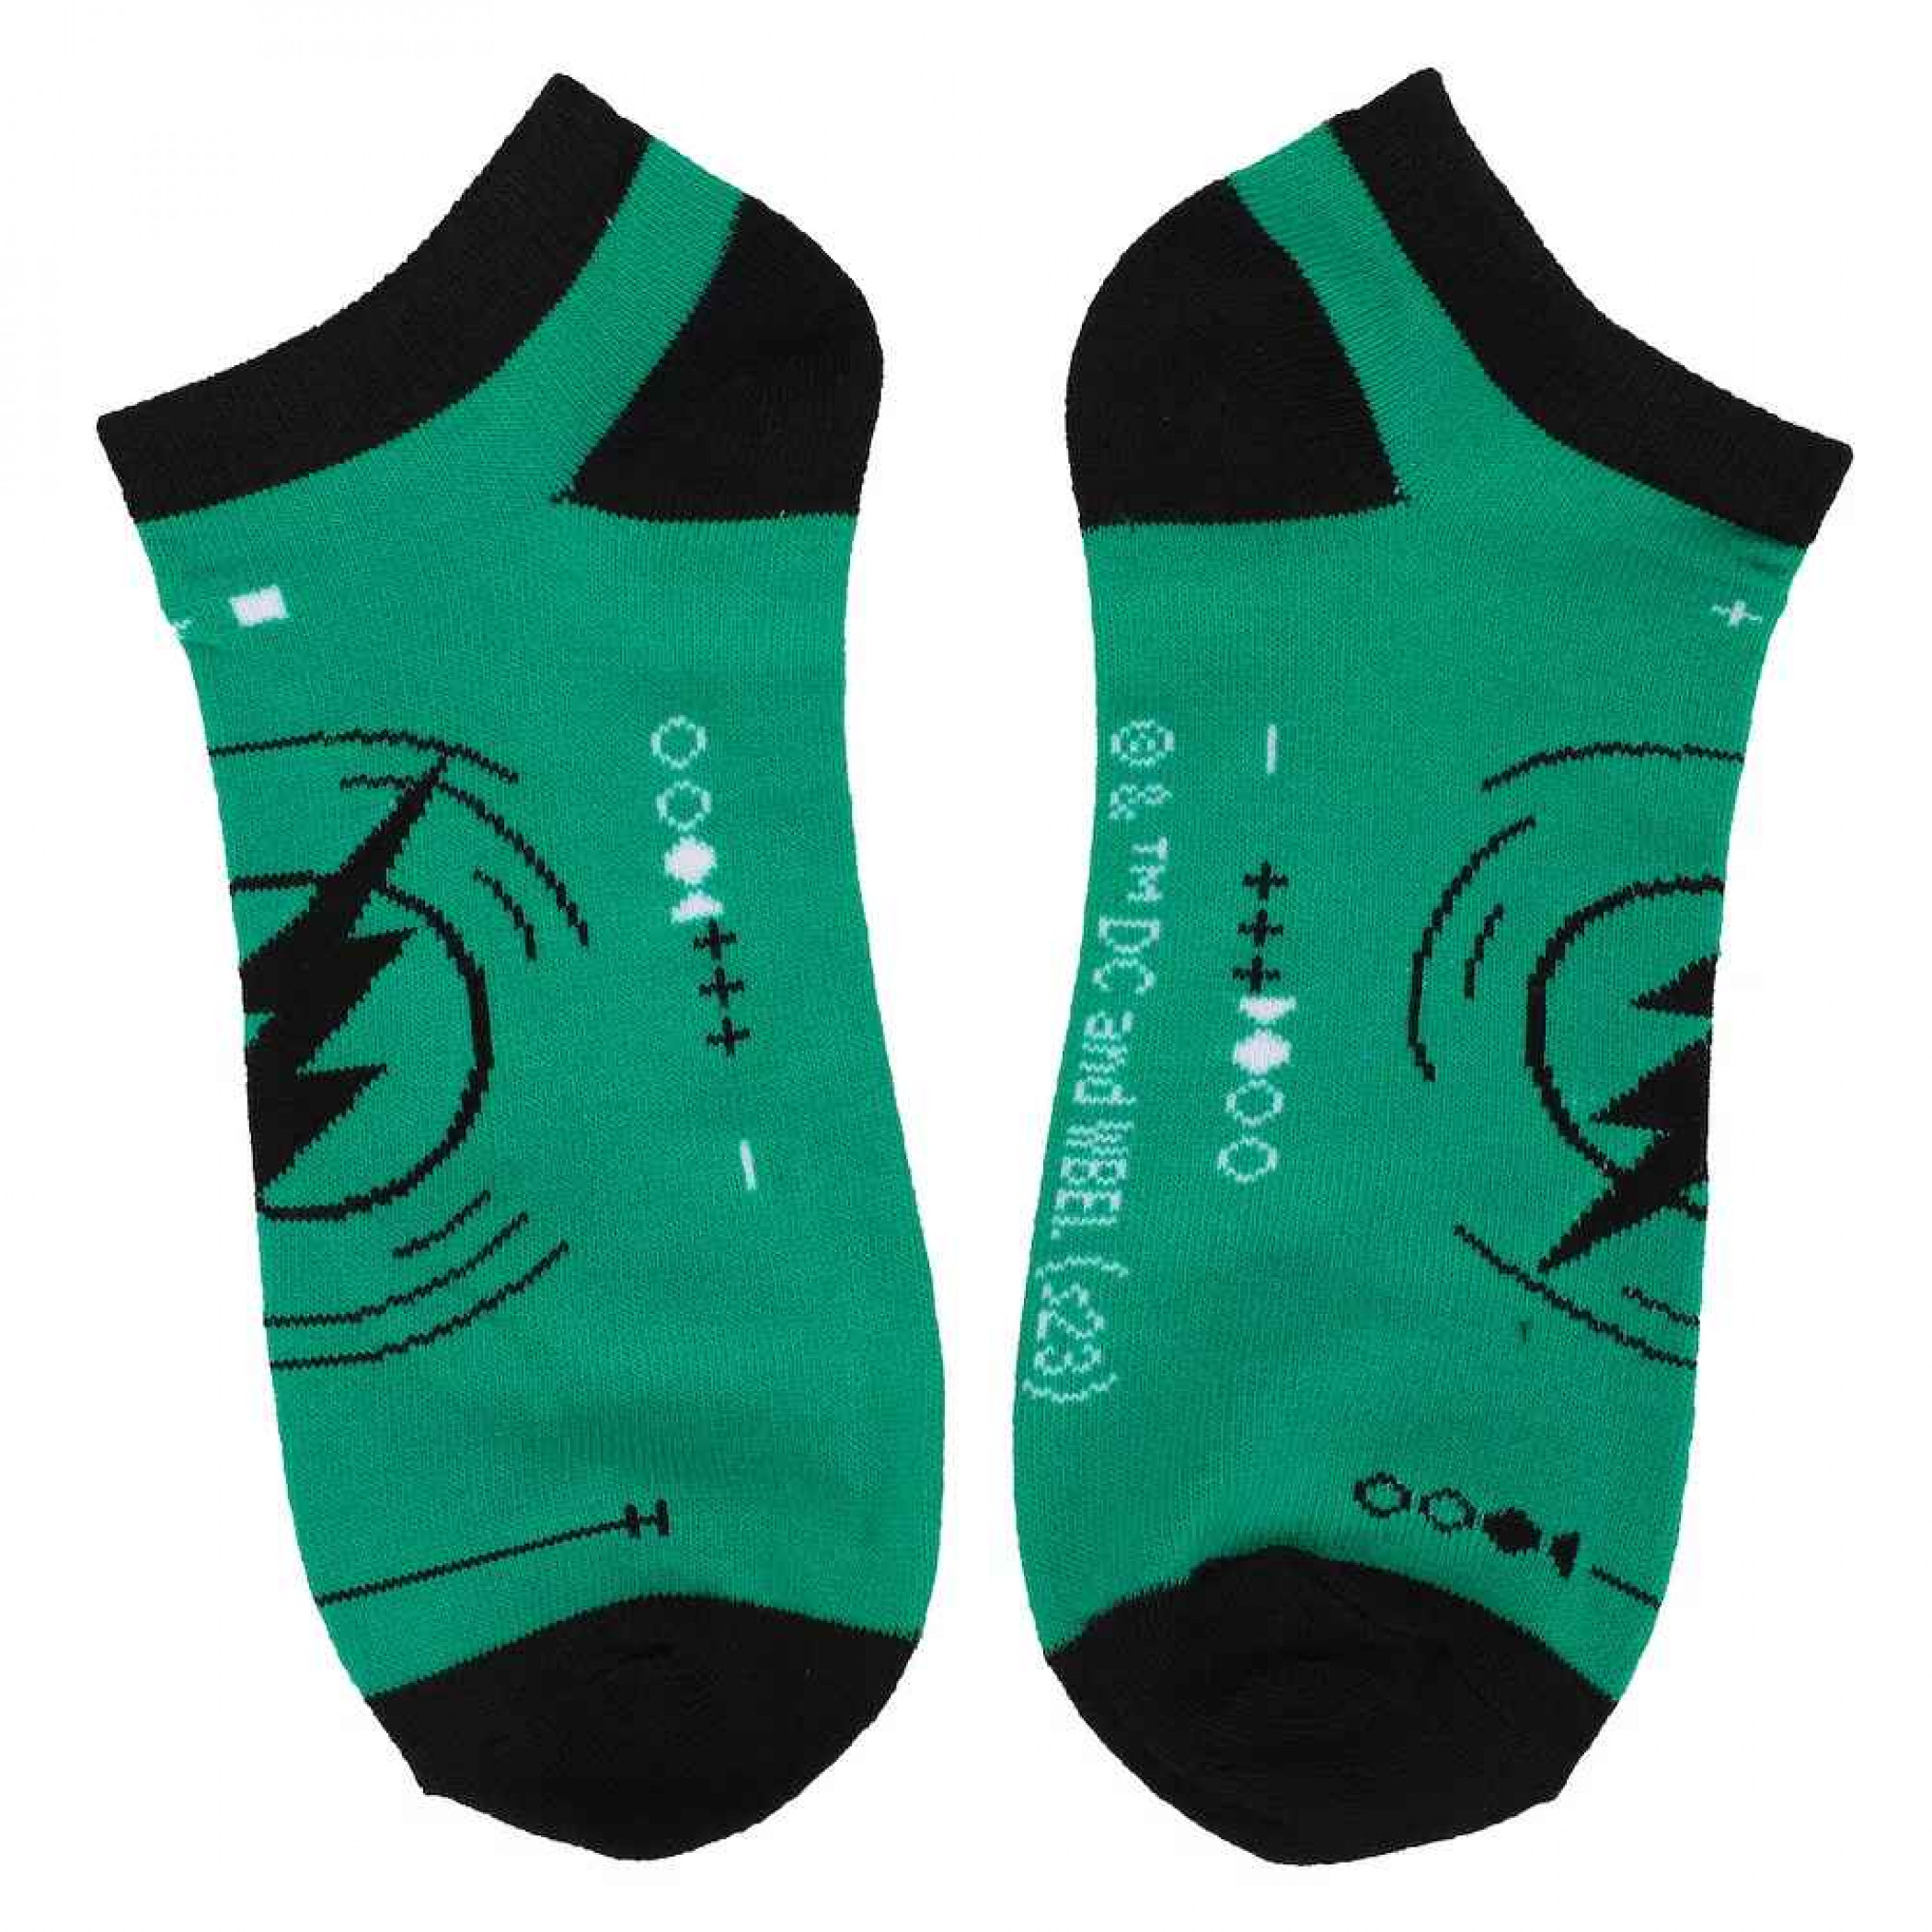 The Flash Worlds Collide 5-Pair Pack of Ankle Socks